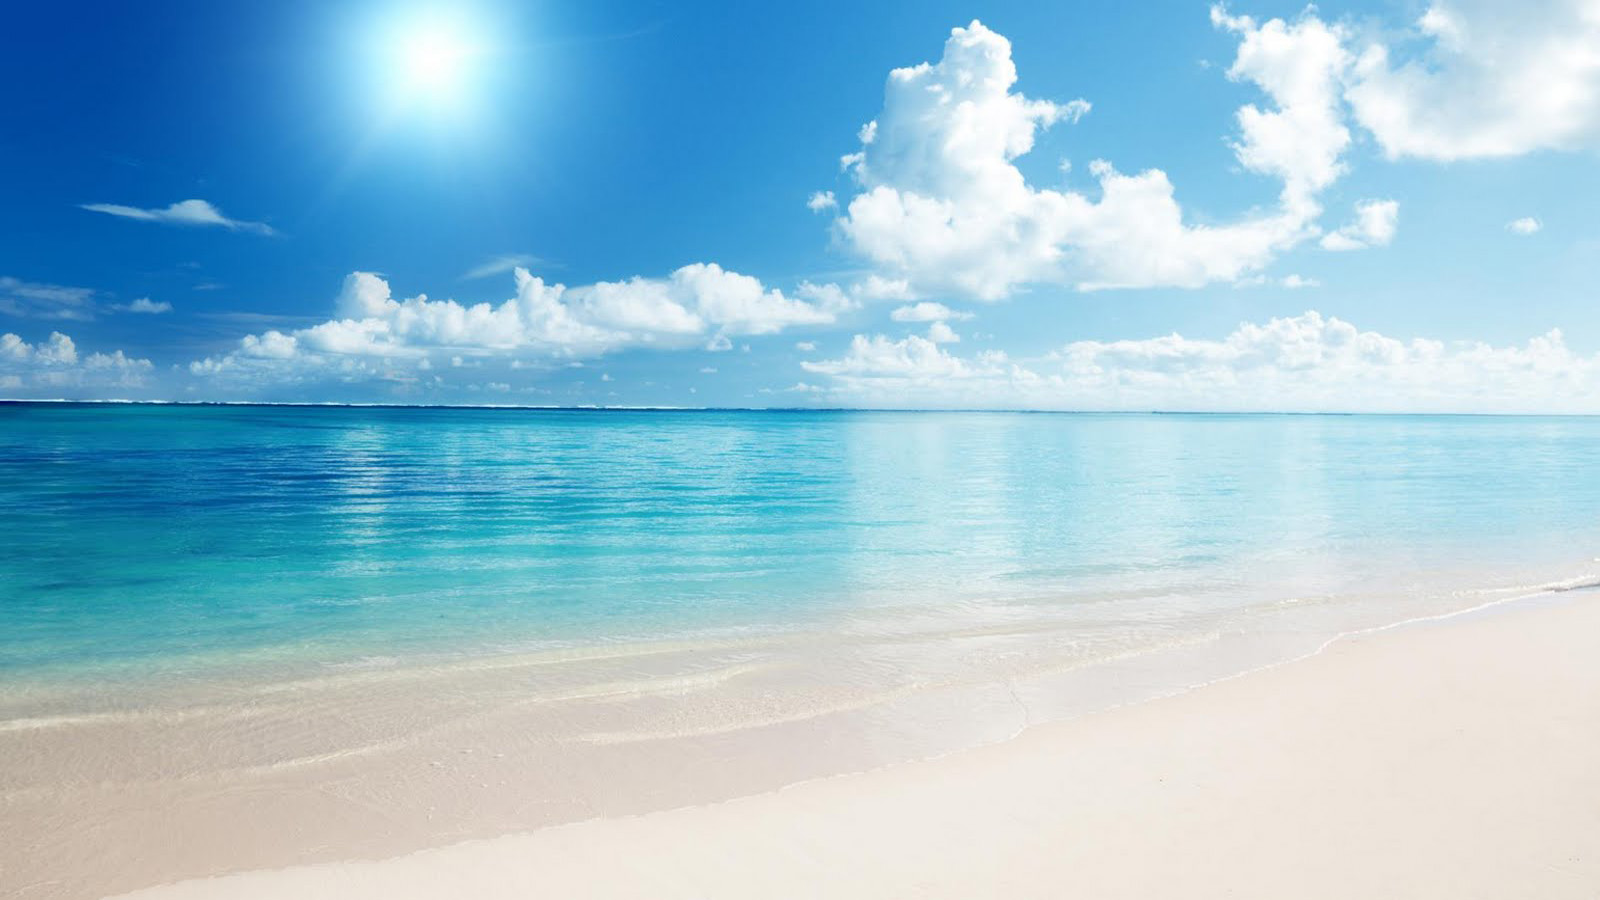 Beautiful Sunny Beach Wallpaper photos of How to Beautify Your ...